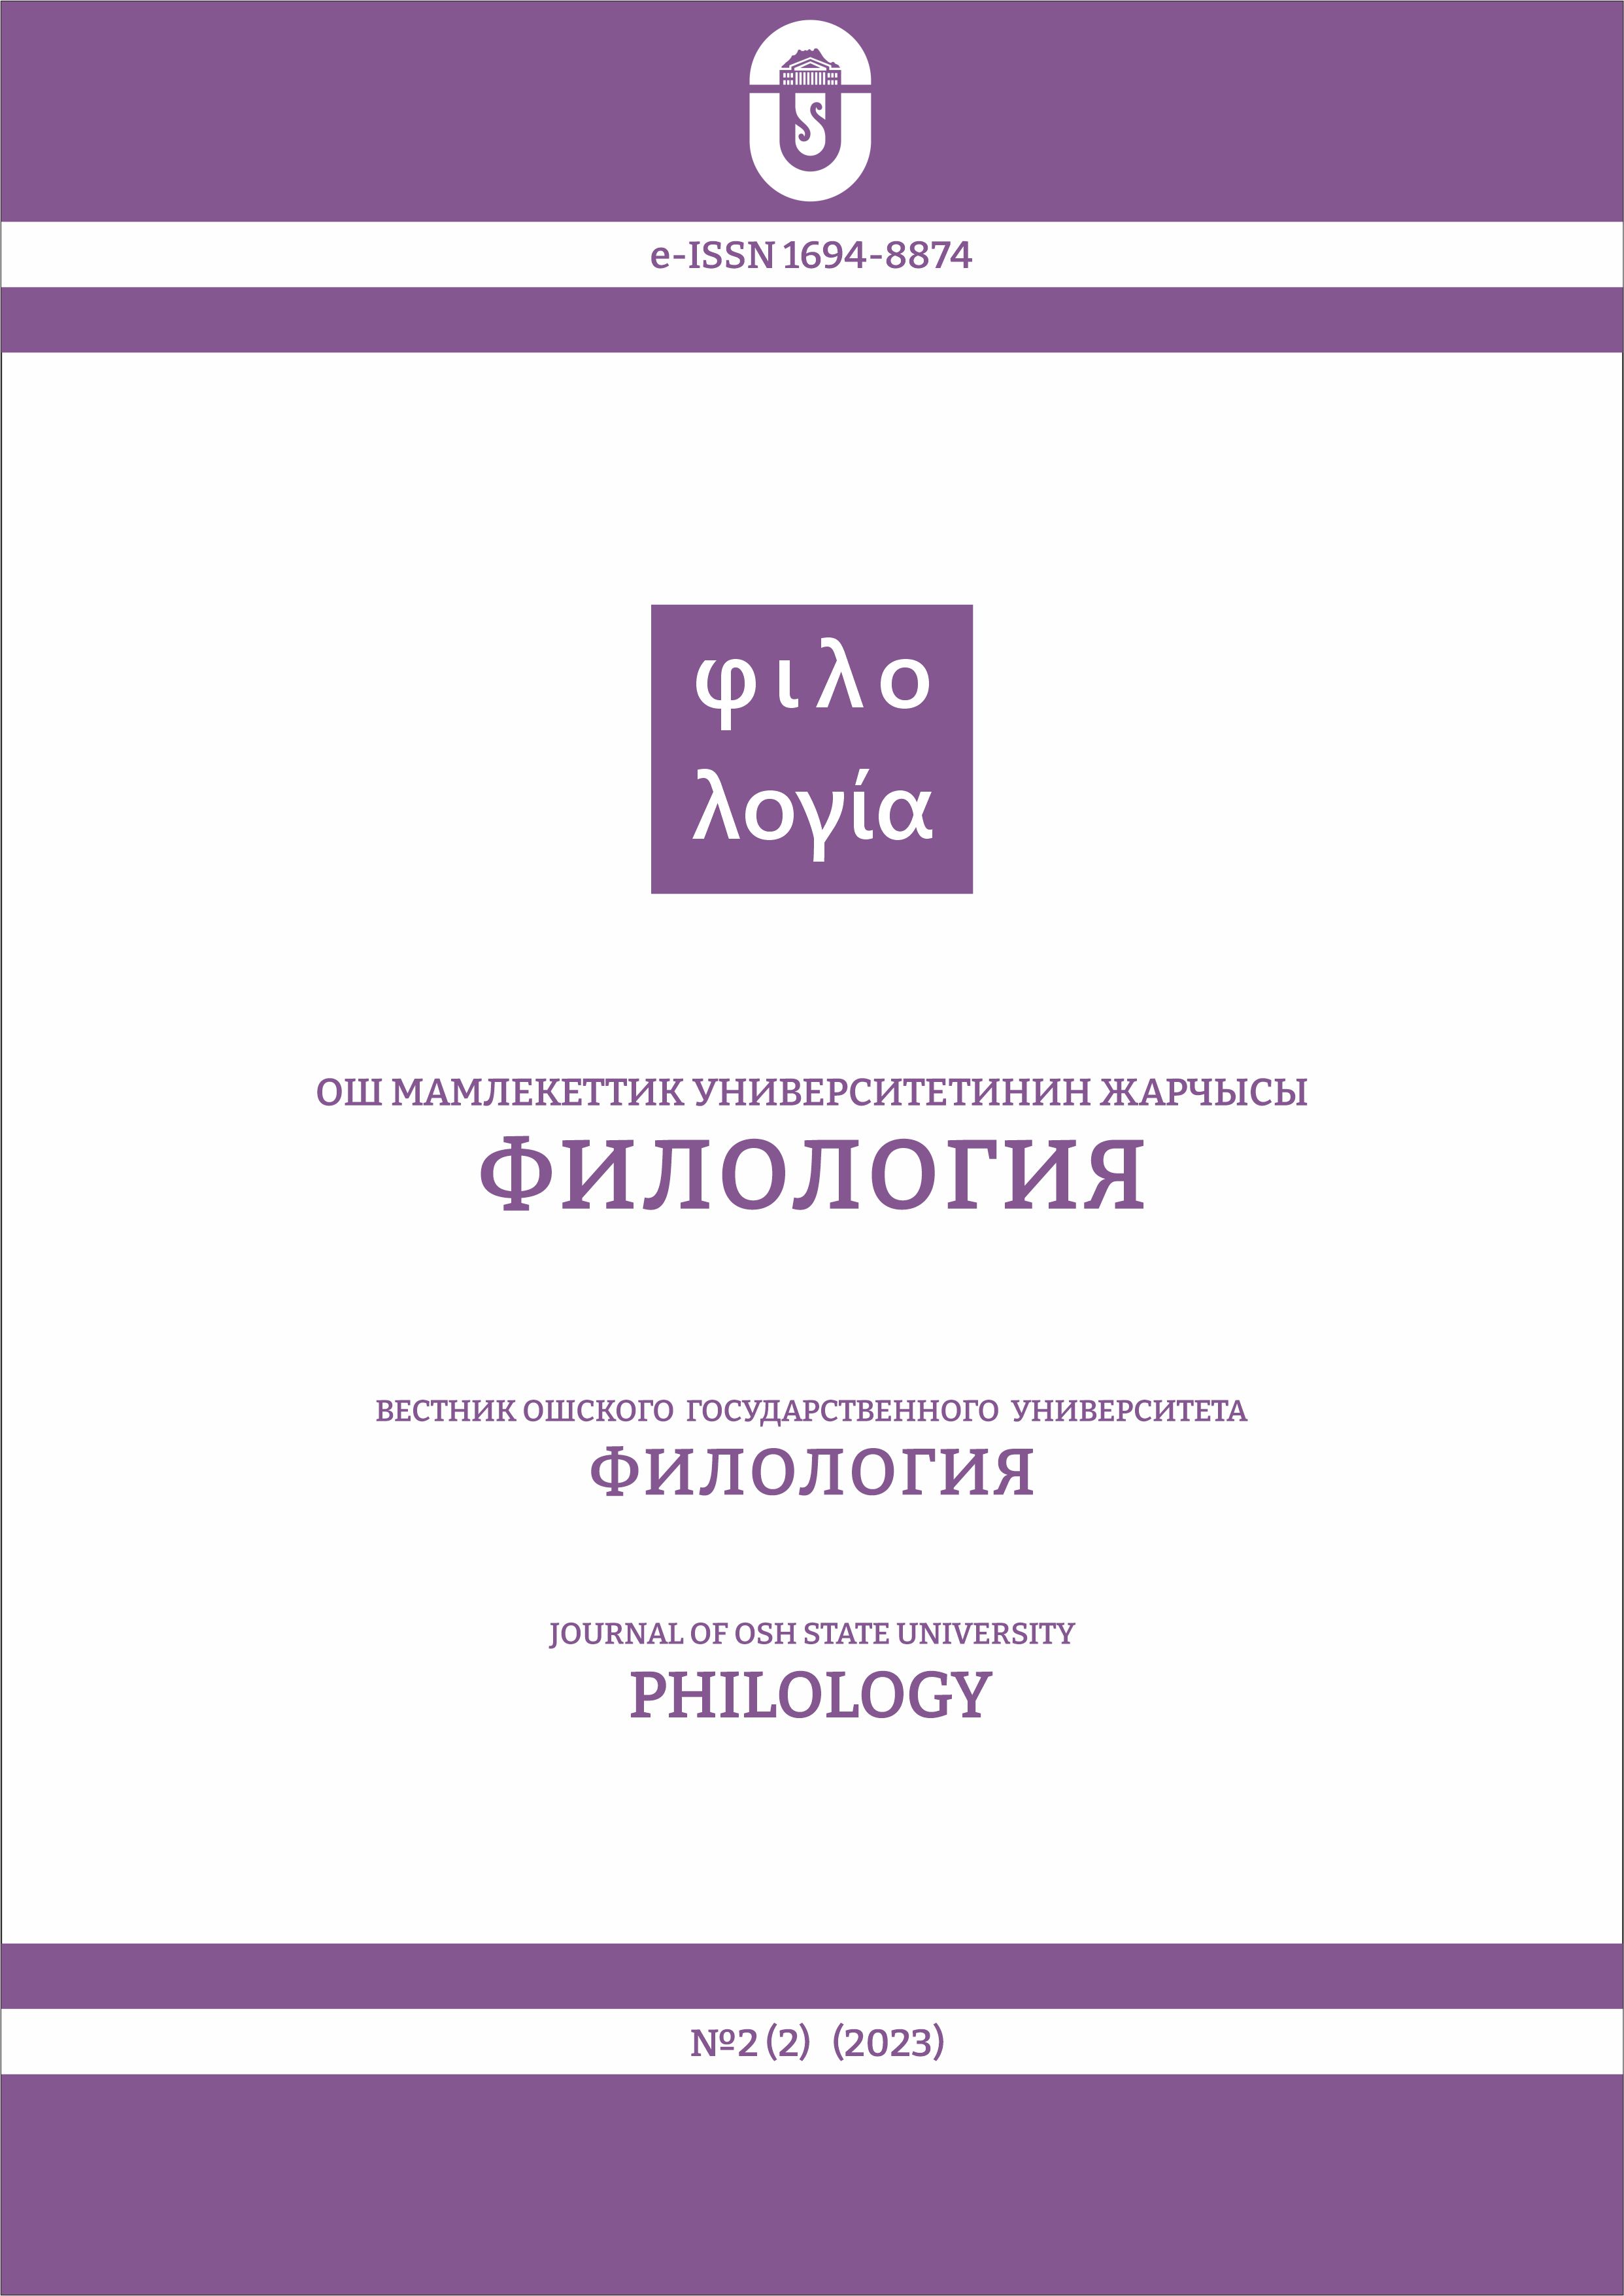 					View No. 2(2) (2023): Journal of Osh State University. Philology
				